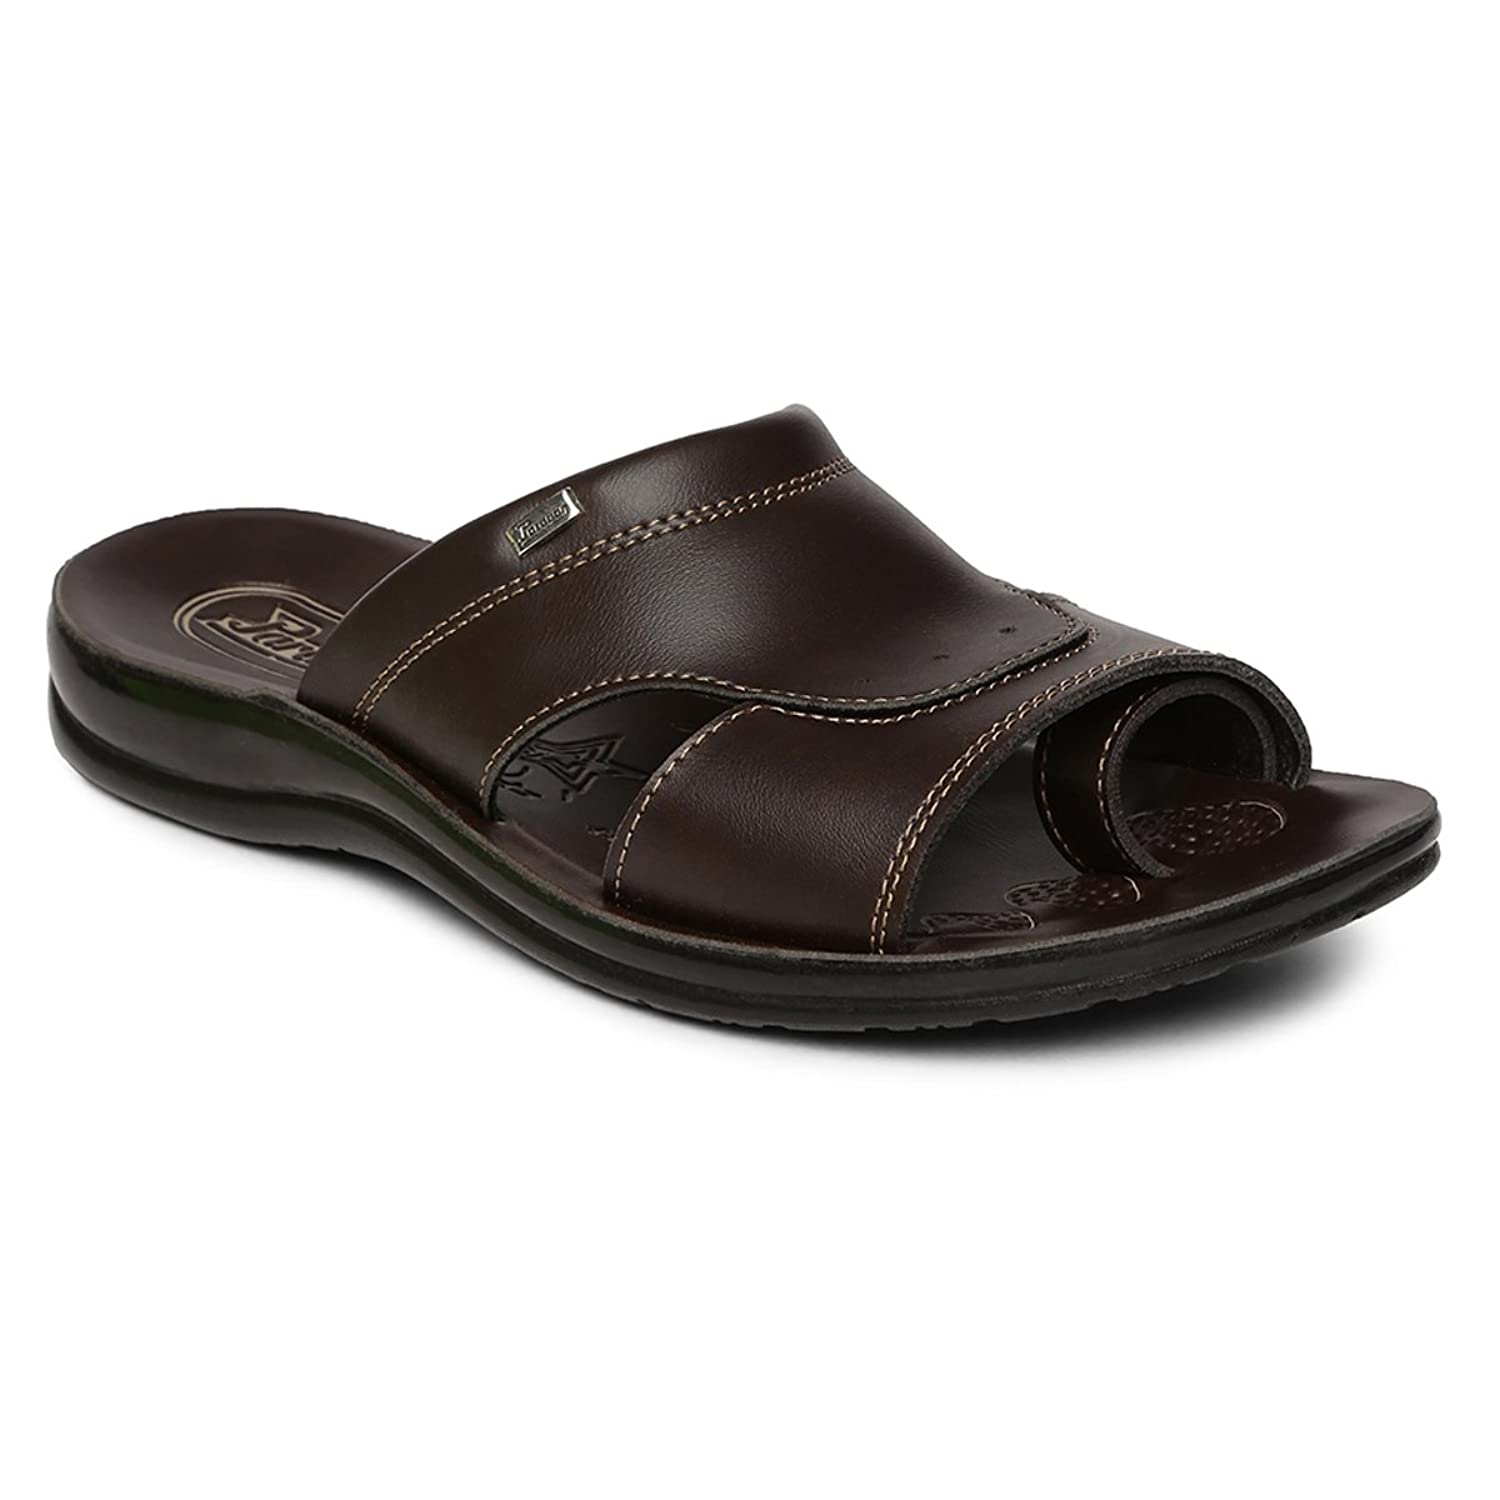 PARAGON Flip-Flops Chappals Sandals Shoes @ Flat 50% Discount Starts From Rs.110